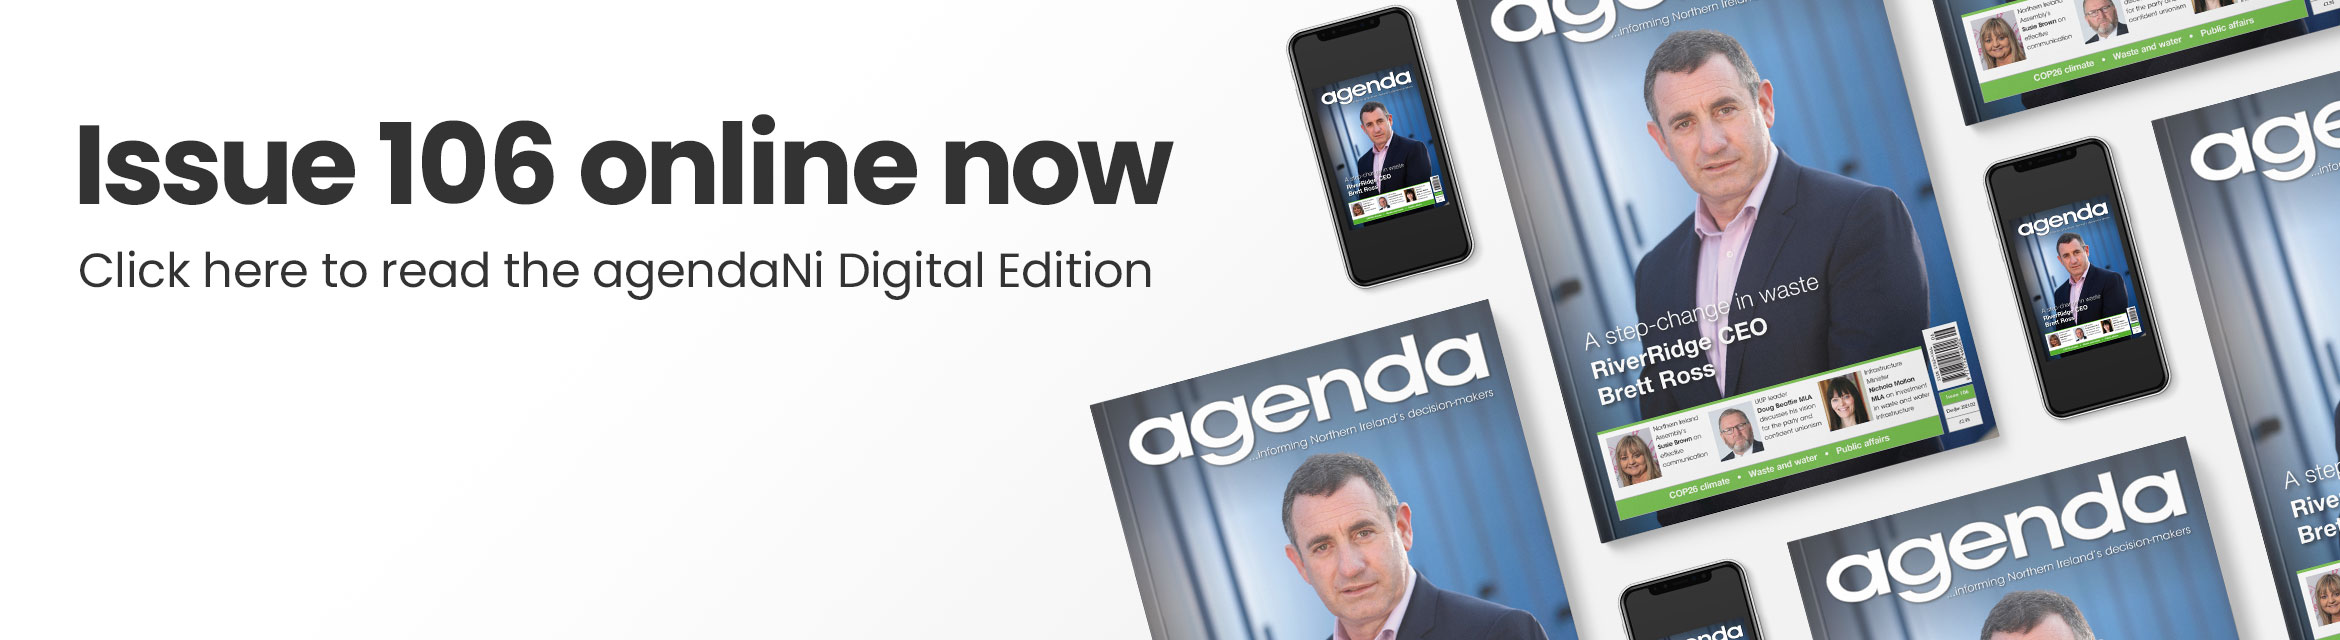 Issue 106 online now. Click here to read the agendaNi Digital Edition.